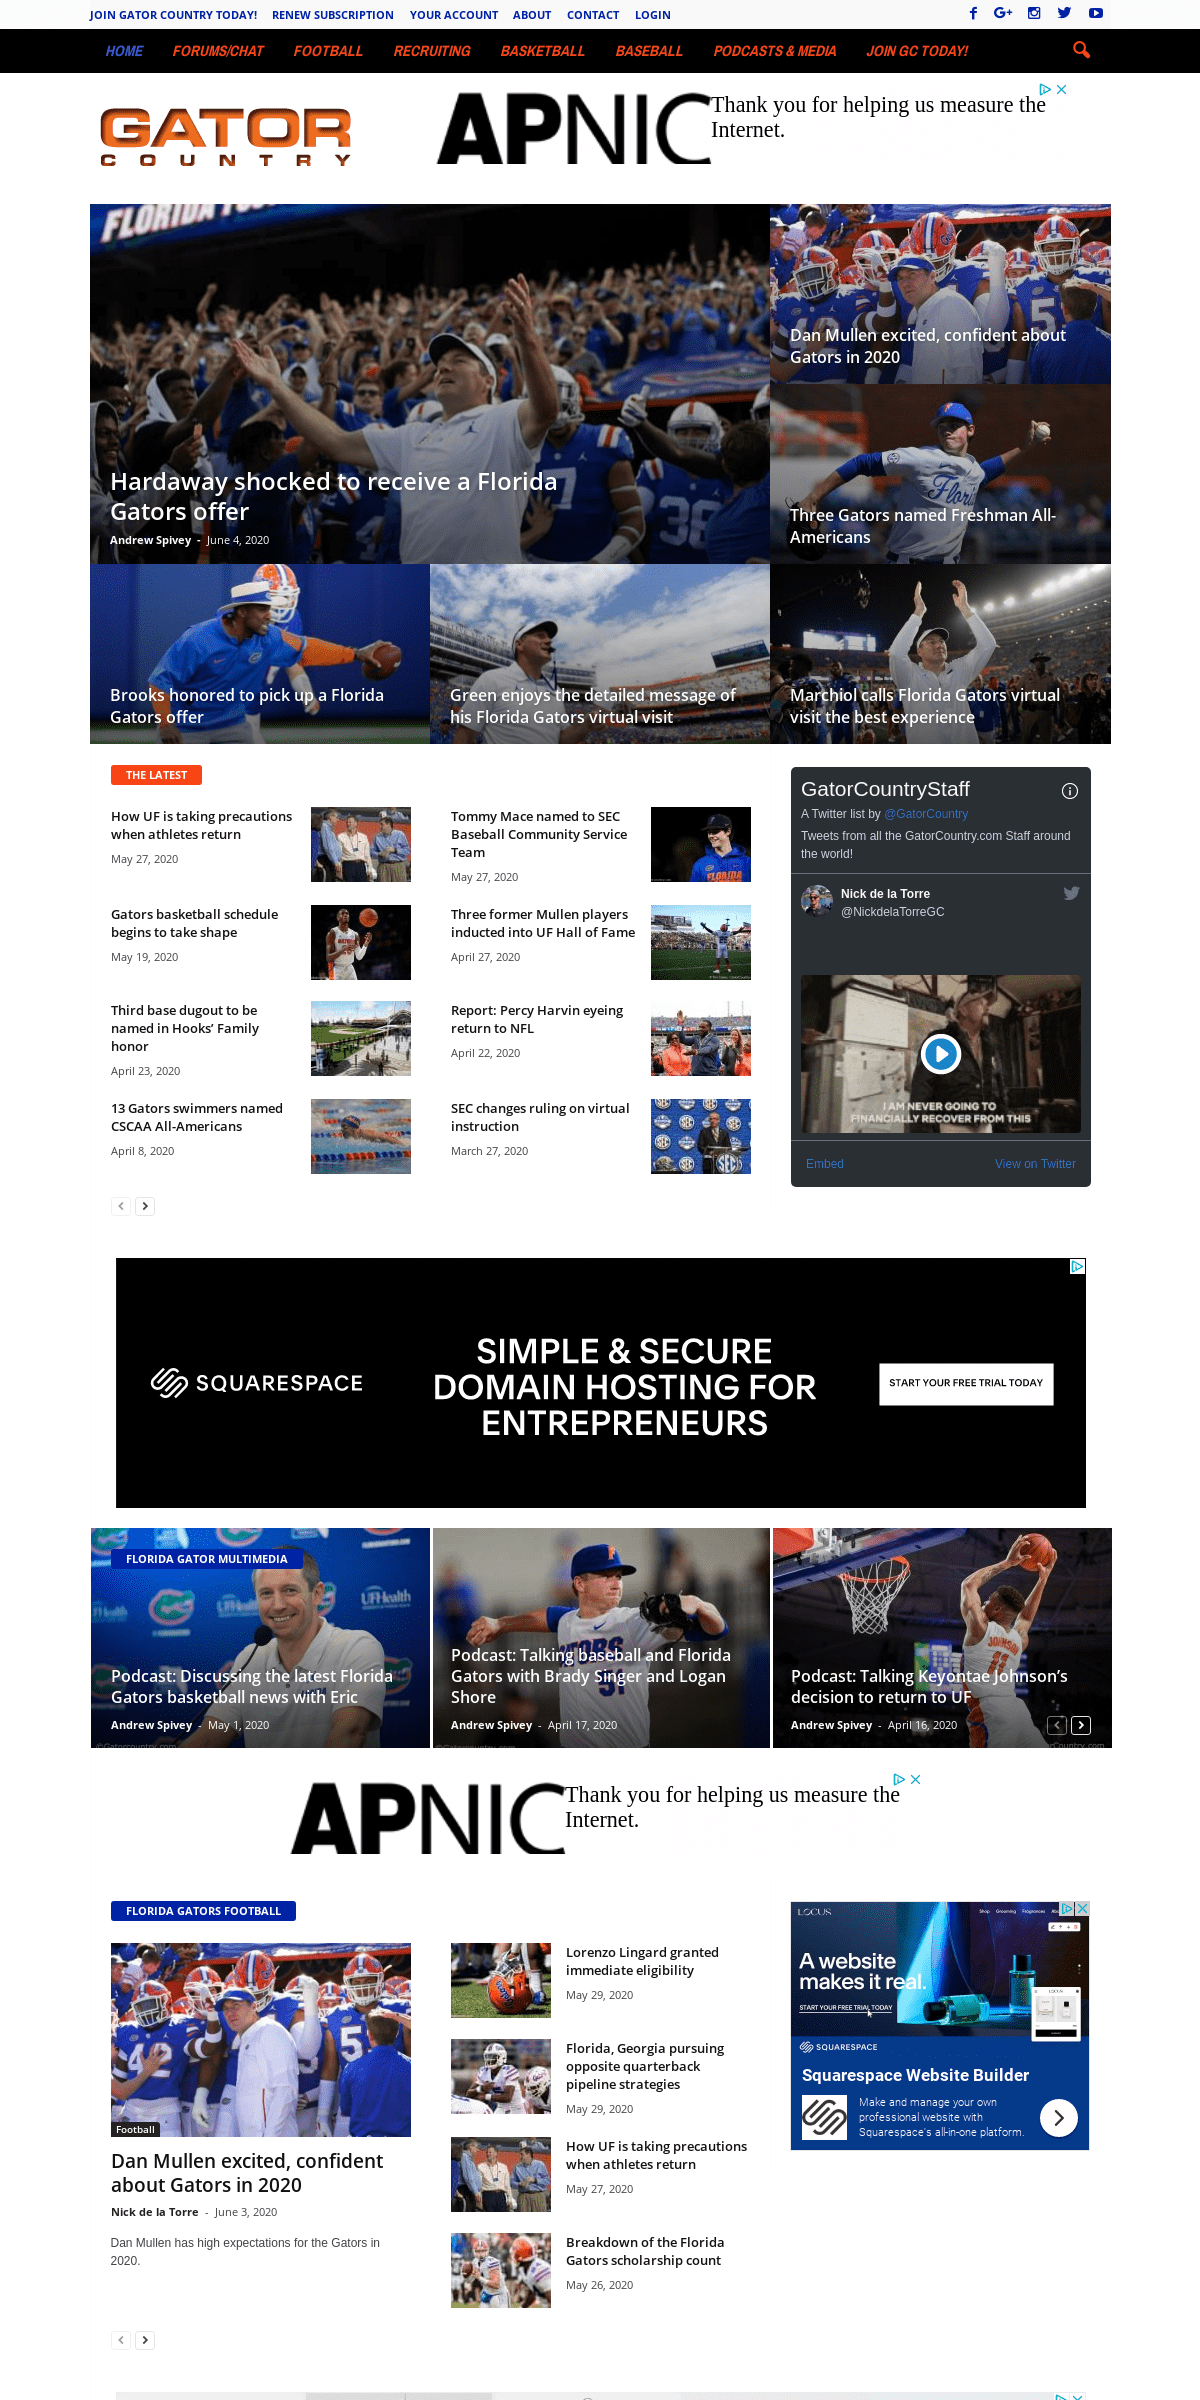 A complete backup of gatorcountry.com